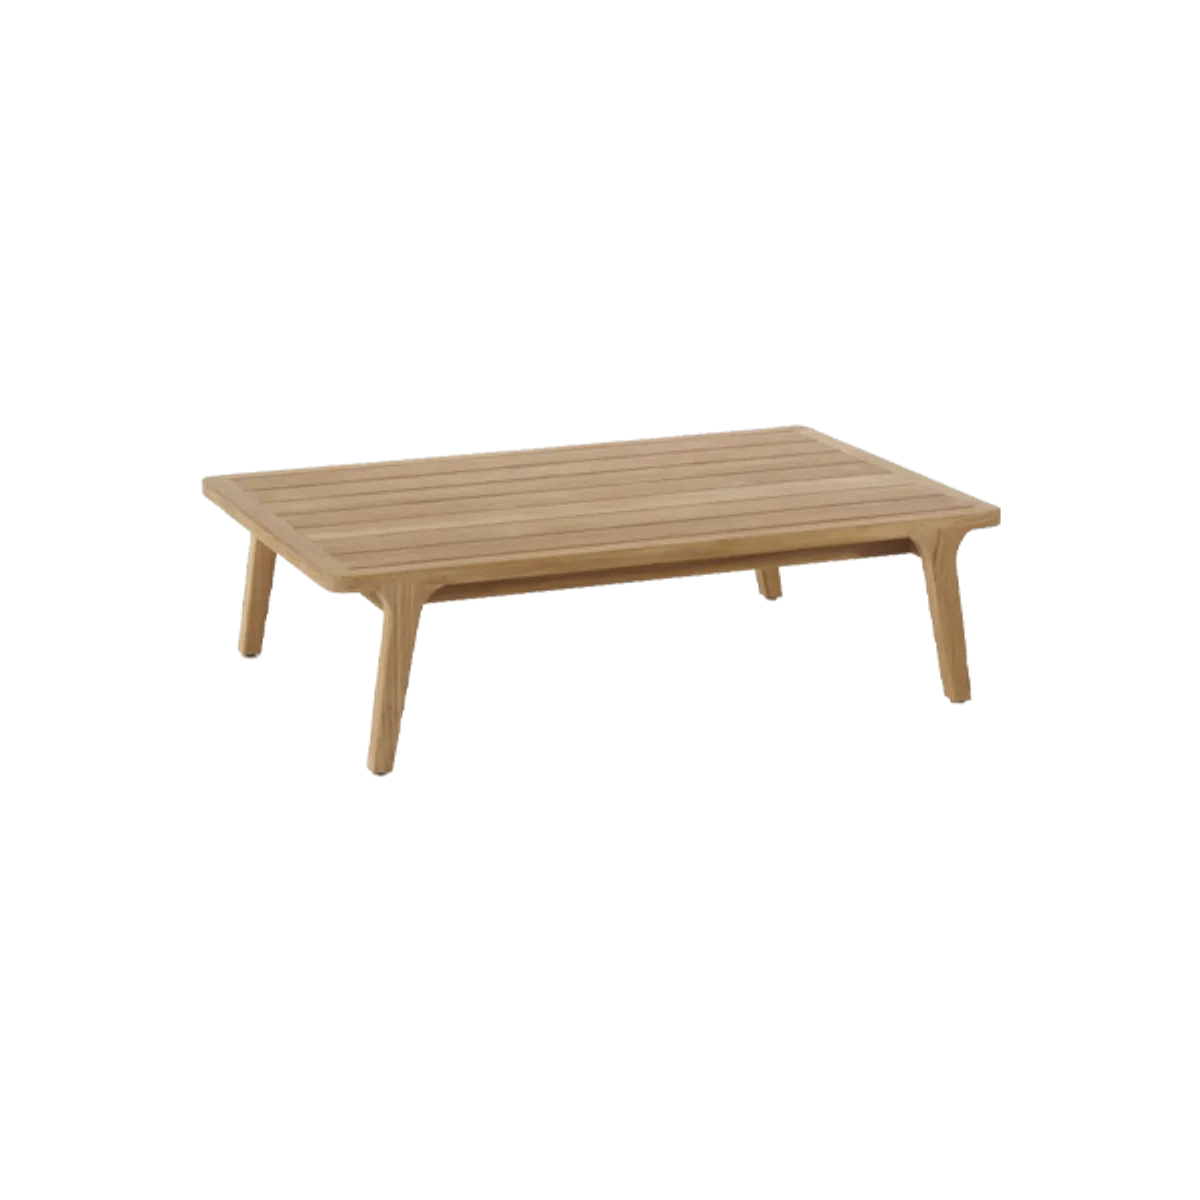 Carnelia small coffee table Inside Out Contracts